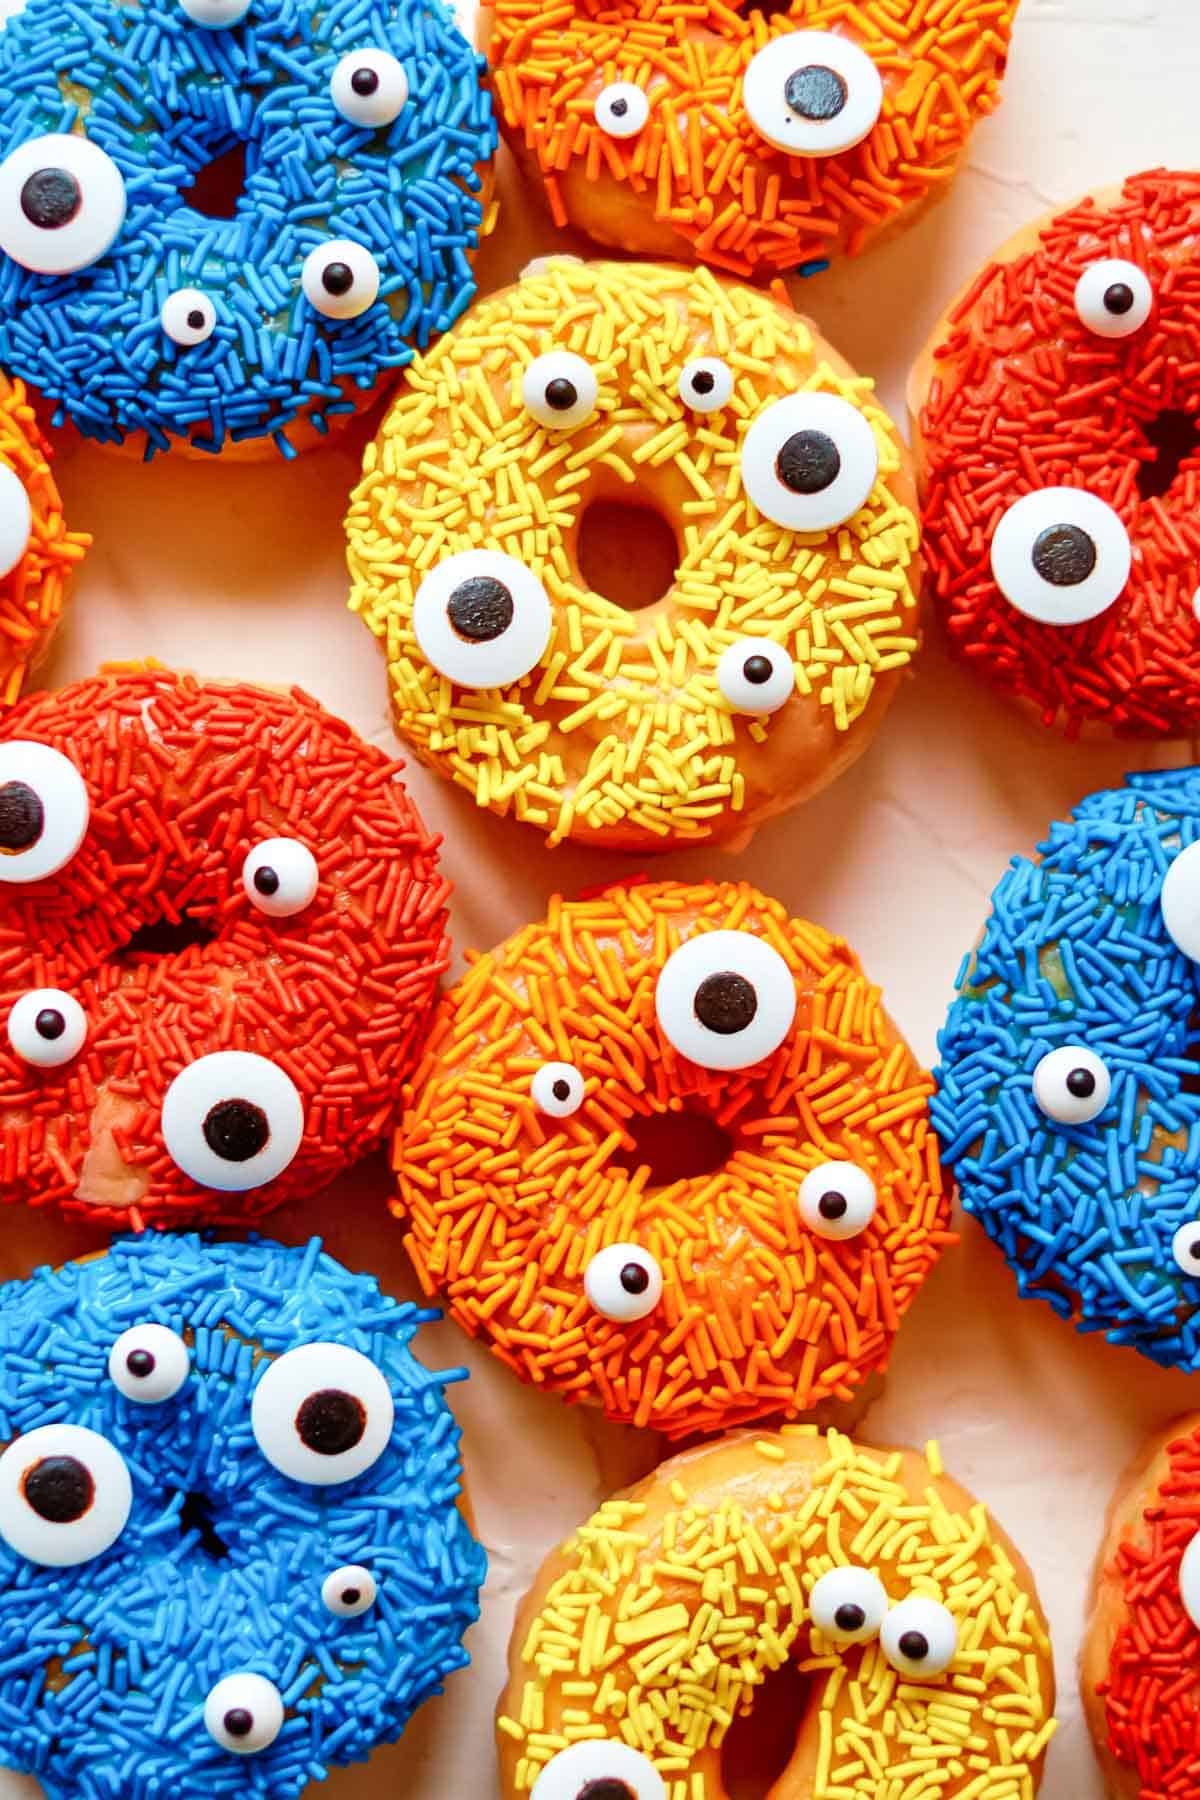 Blue, yellow, orange and red sprinkled donuts next to each other.